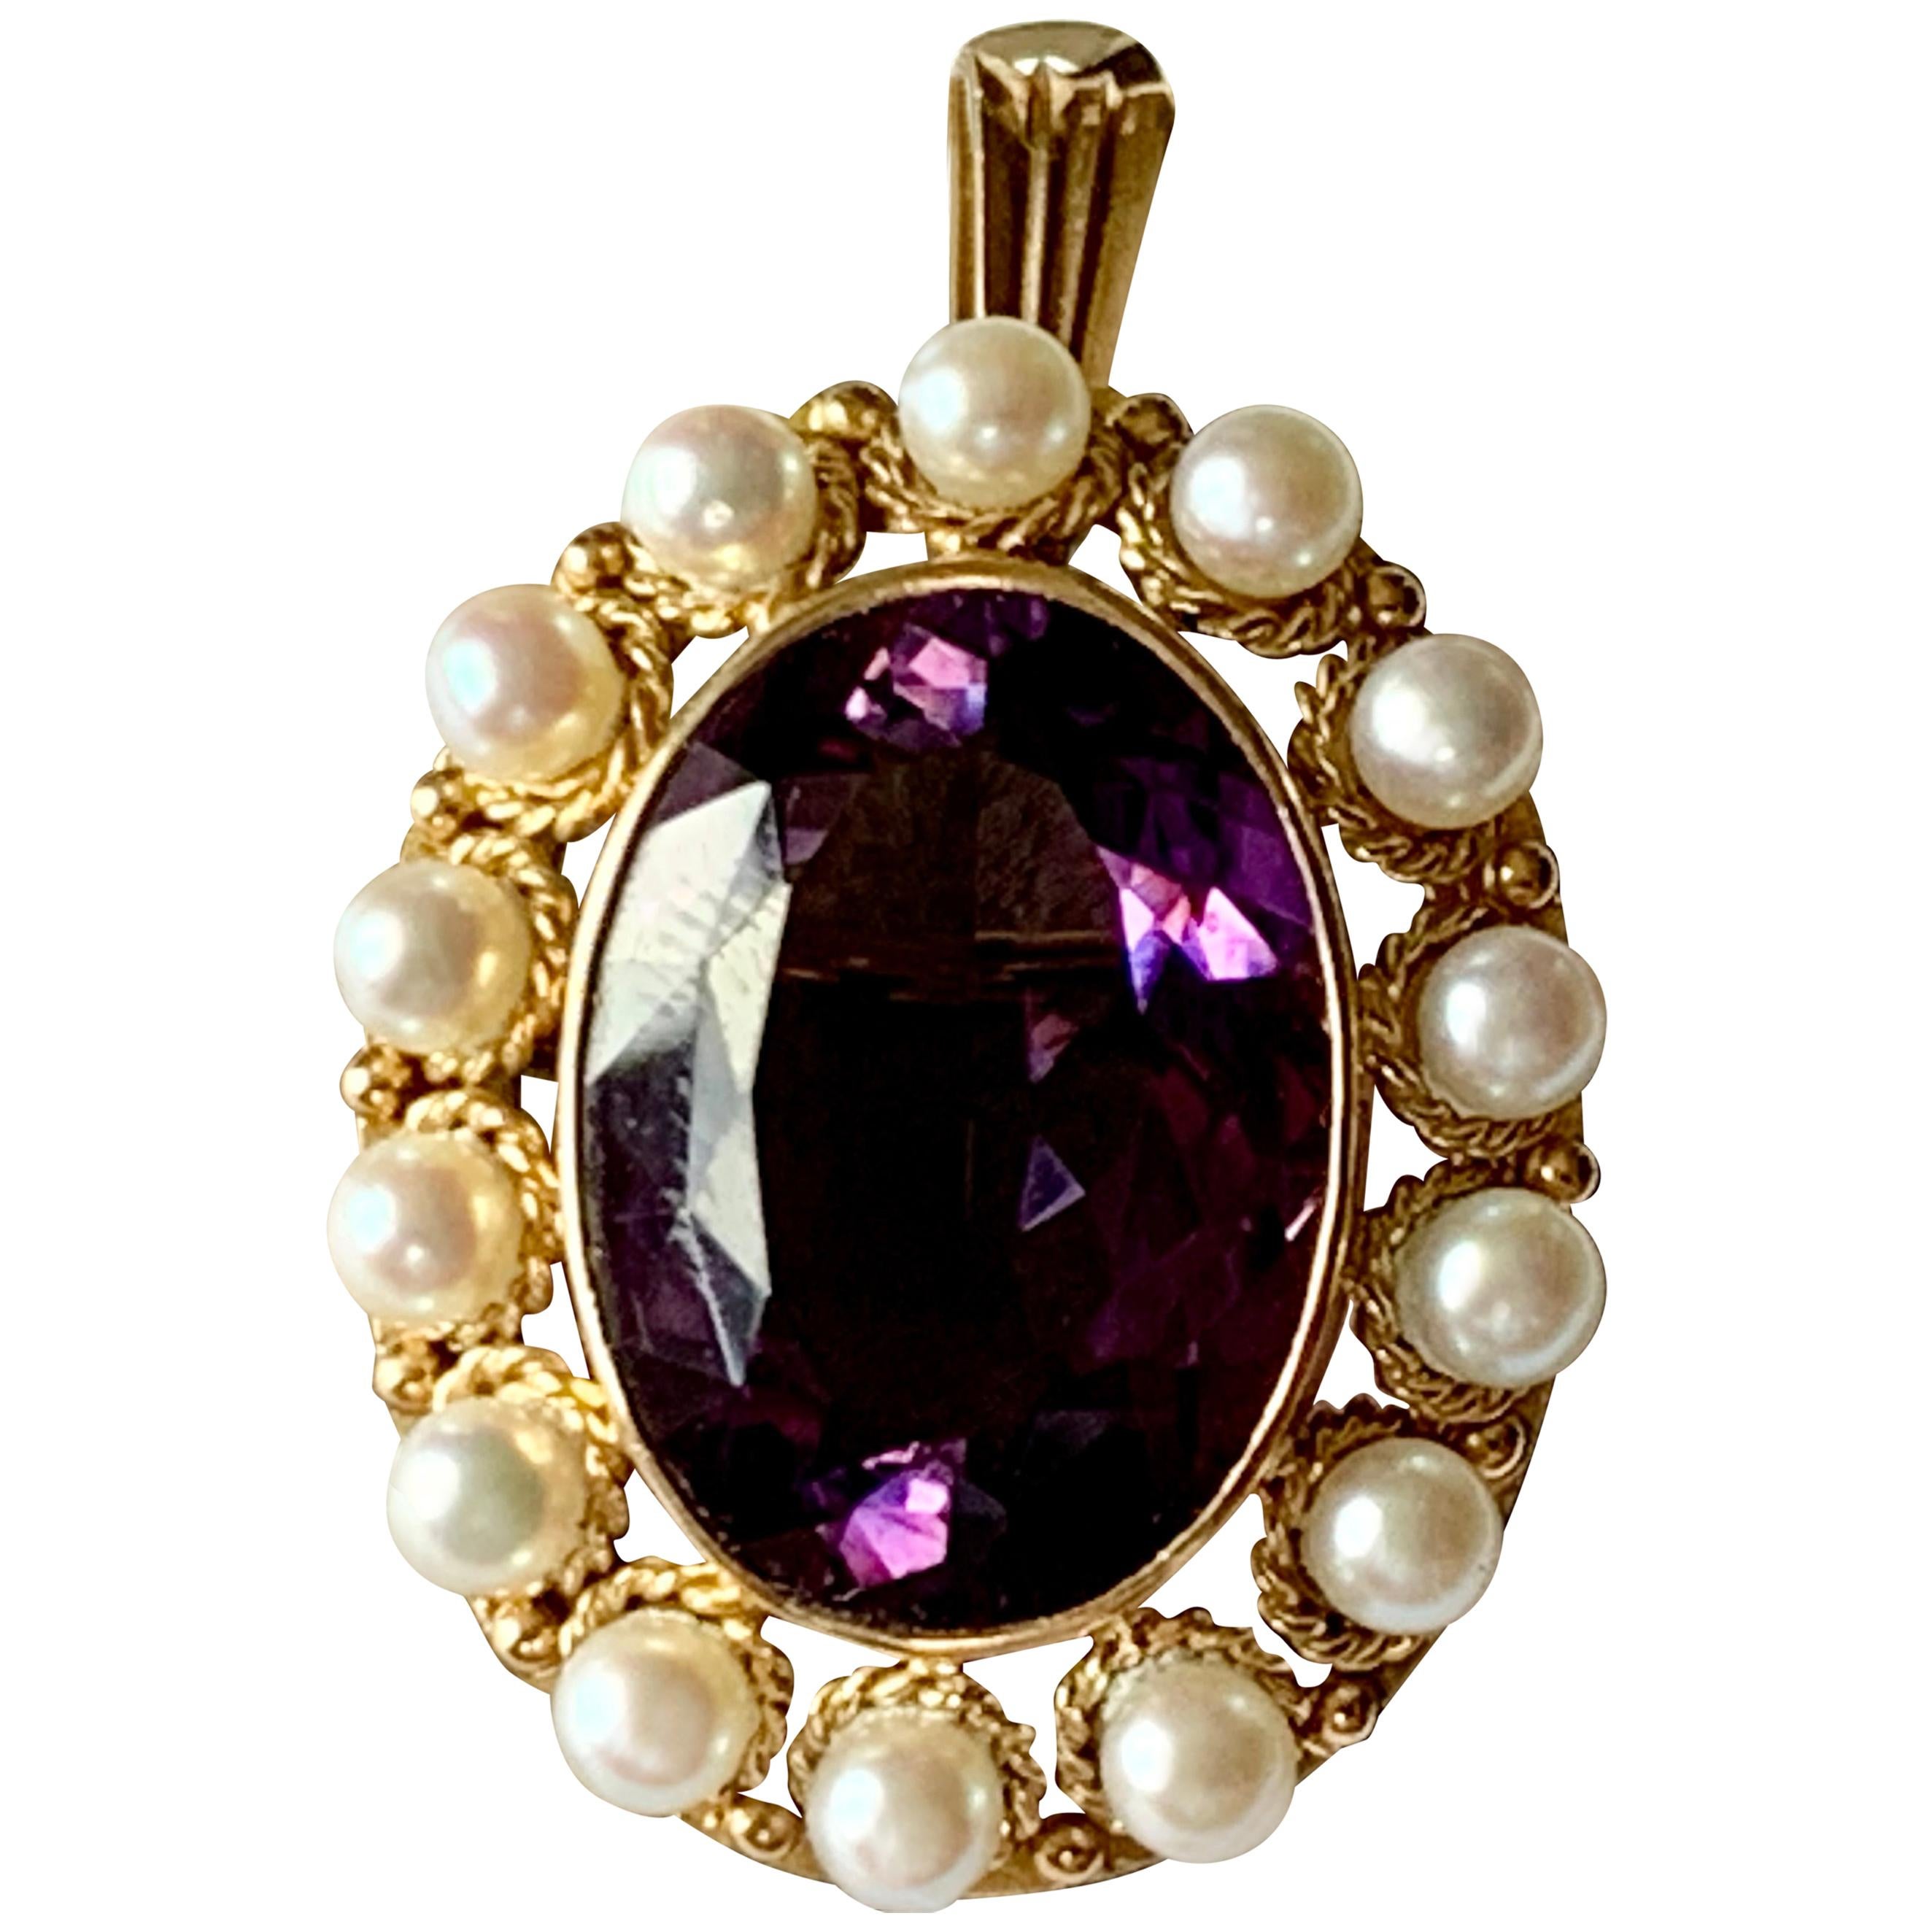 Vintage 18 K Yellow Gold Victorian Inspired Brooch/Pendant Amethyst and Pearls